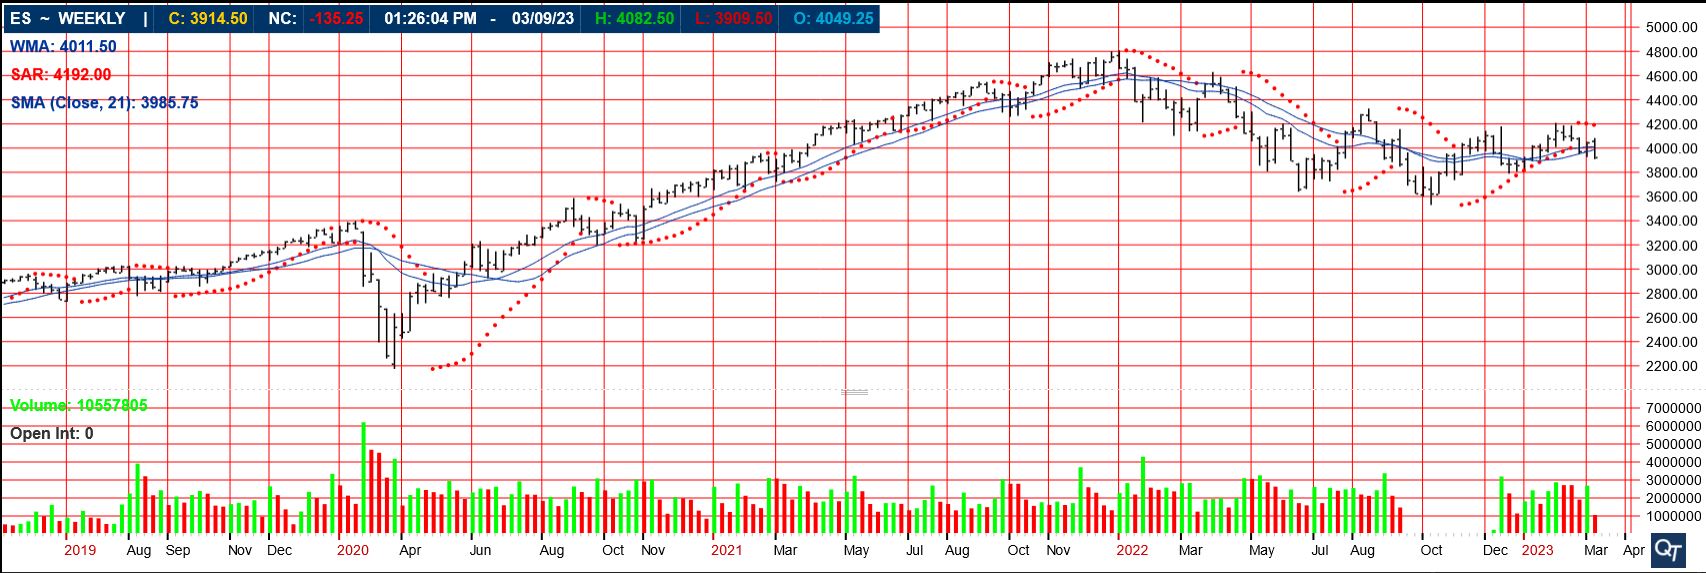 S&P 500 Index Futures Trading Chart updated March 10th, 2023